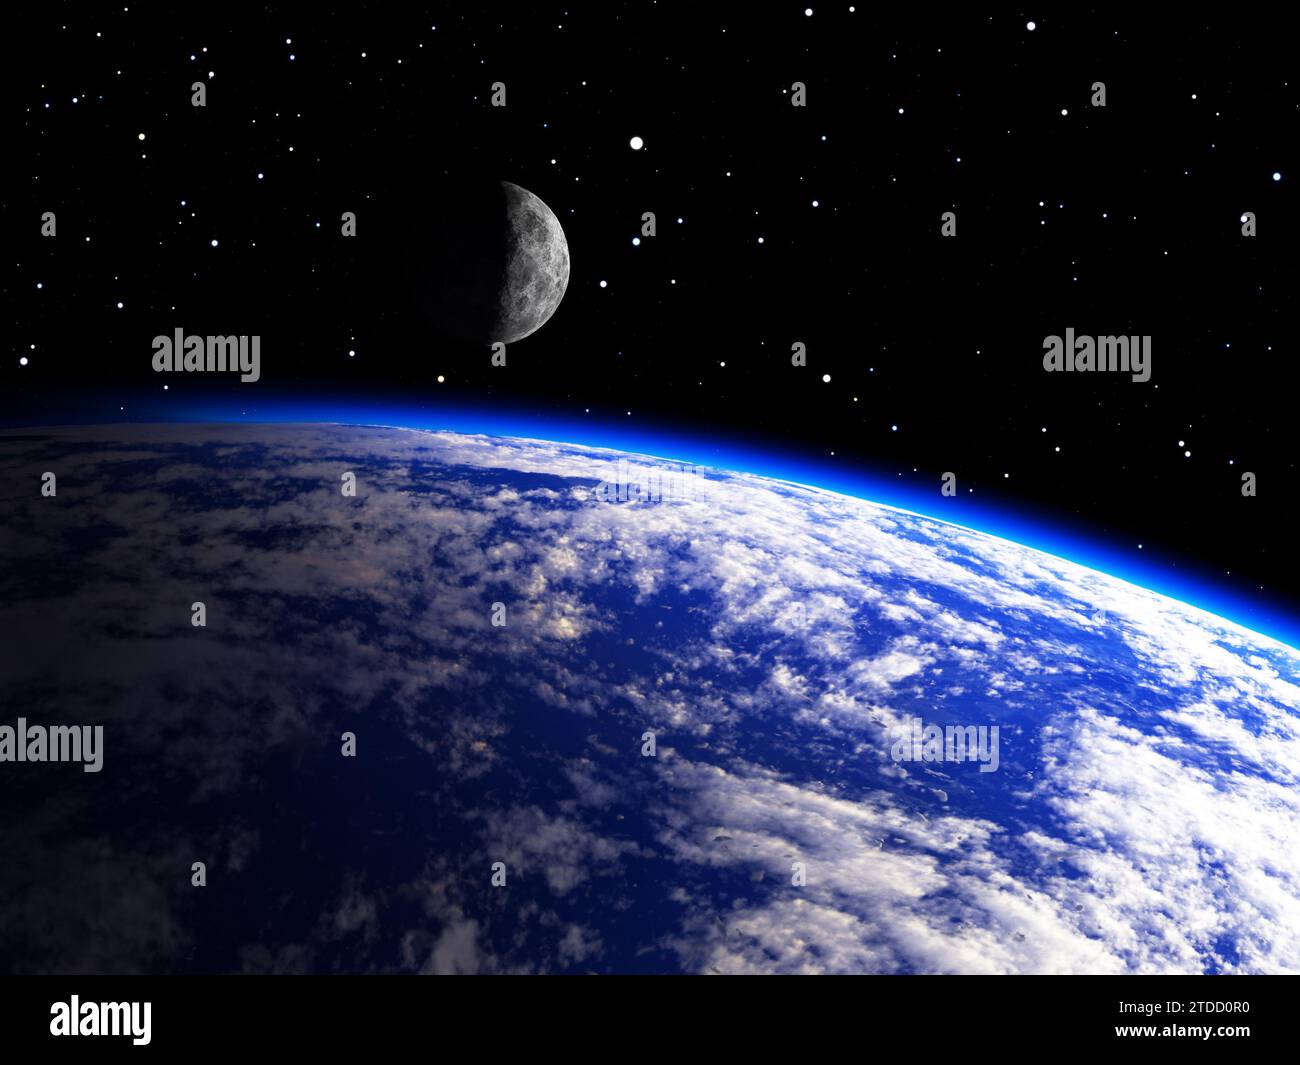 Earth Planet with a Moon, 3d illustration Stock Photo